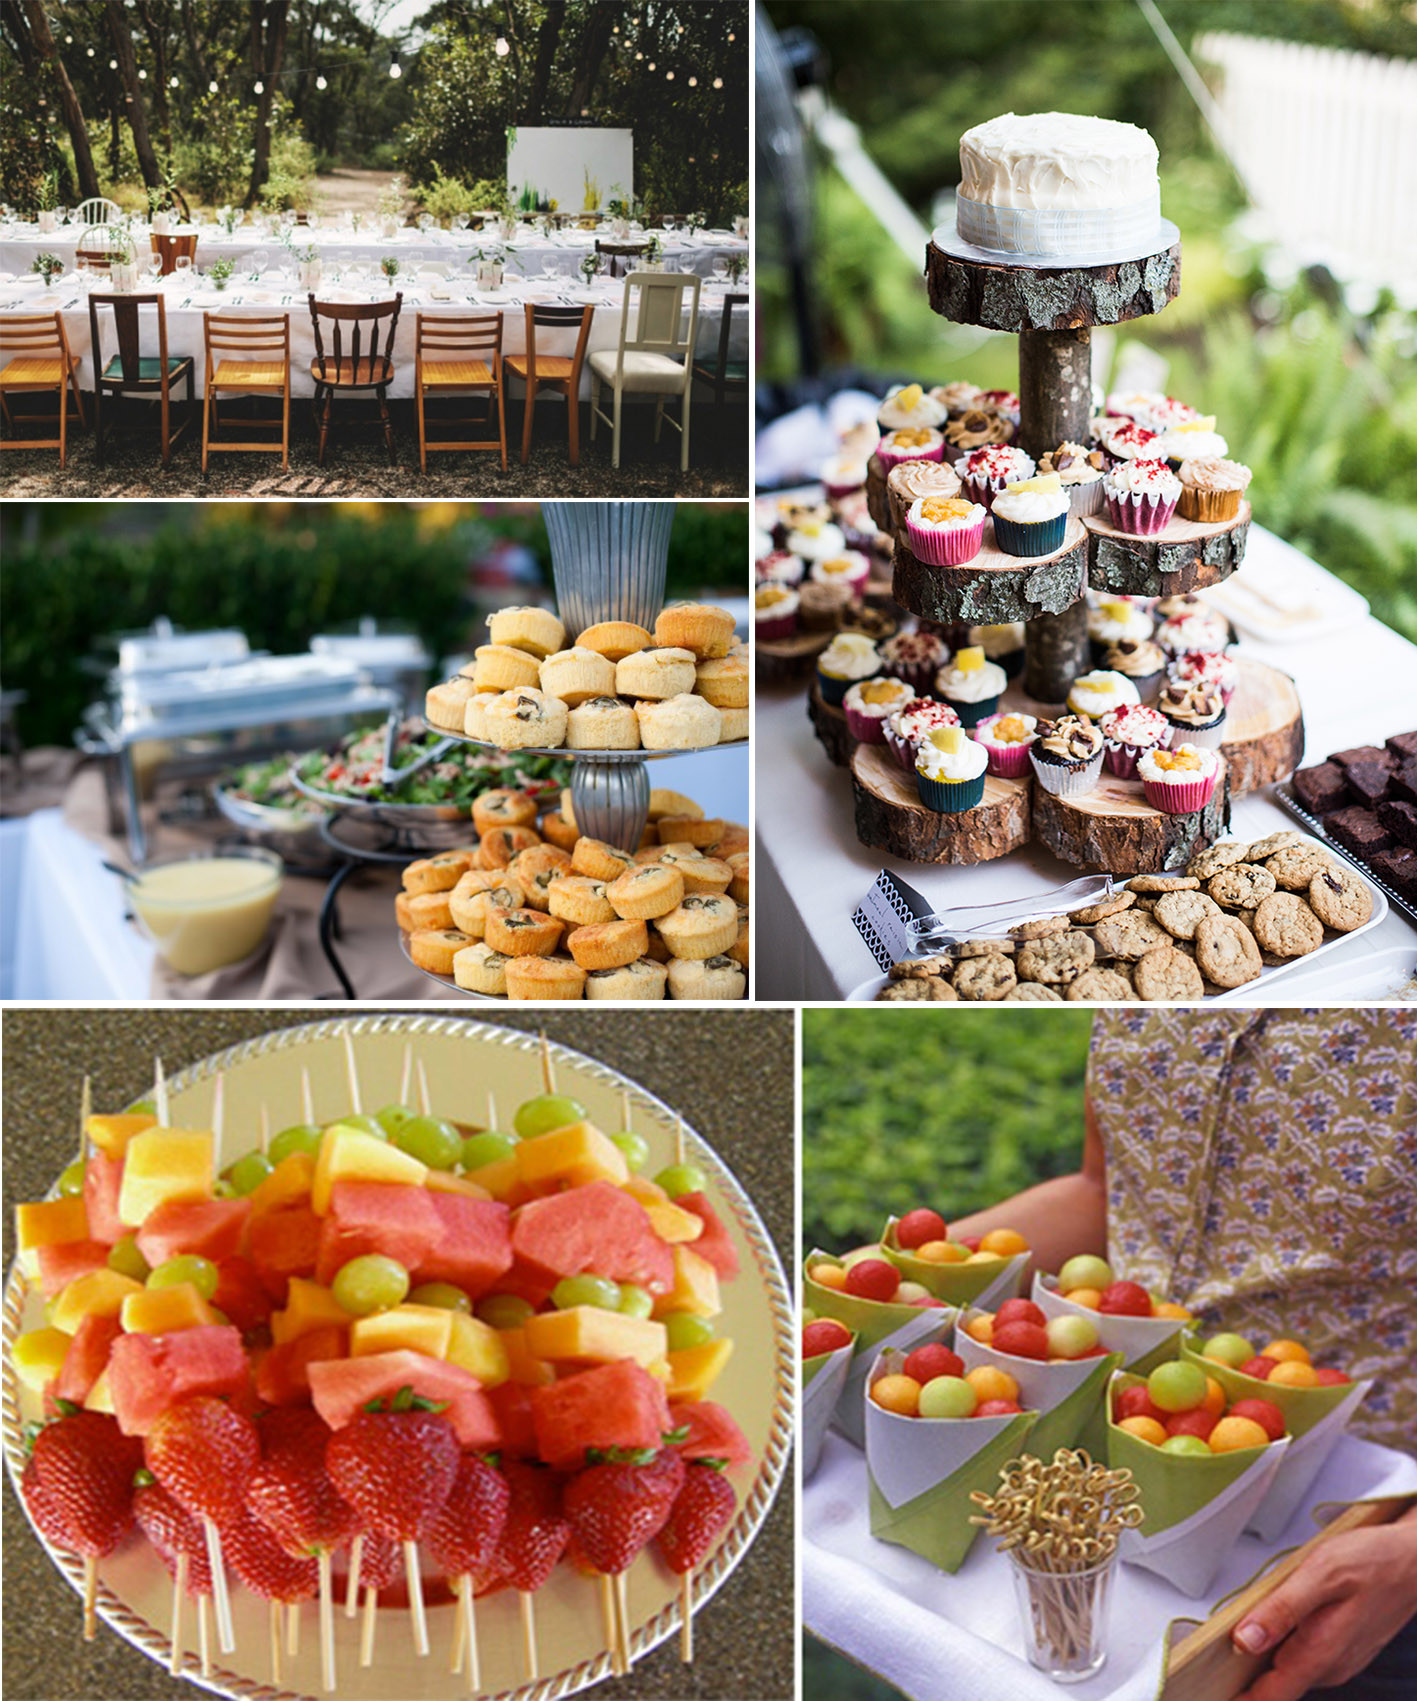 Food Ideas For A Party
 How to play a backyard themed wedding – lianggeyuan123